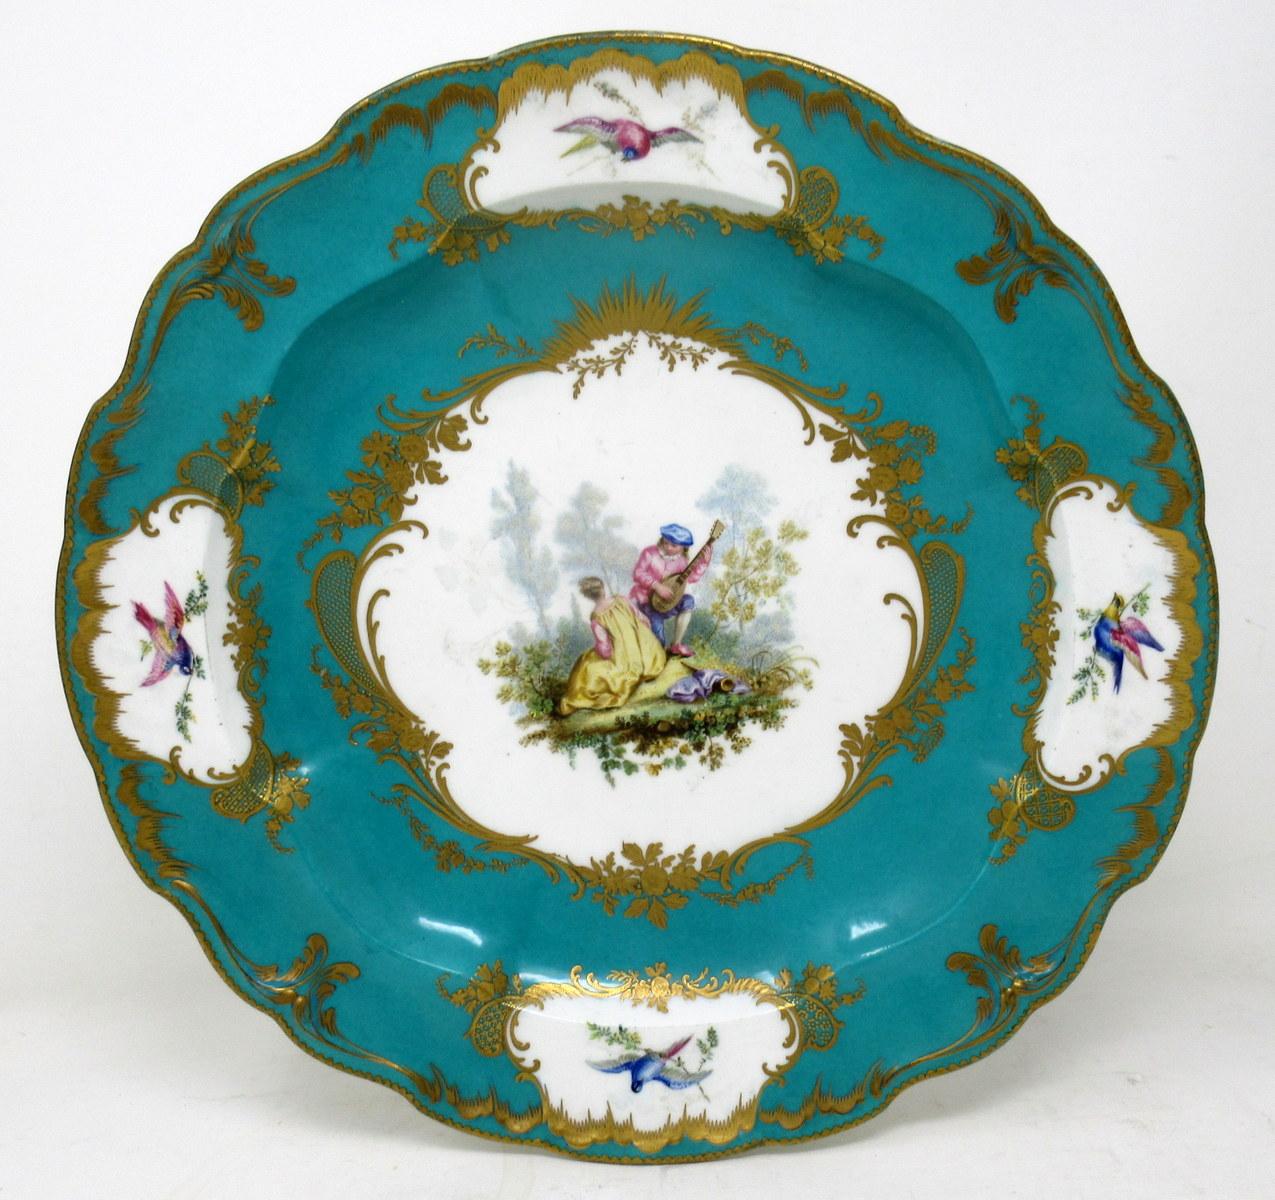 An exceptionally well hand painted French sevres style soft paste porcelain circular centerpiece, deep dish or cabinet plate of large proportions, last half of the nineteenth century, possibly earlier. 

The central reserve with an exquisite hand